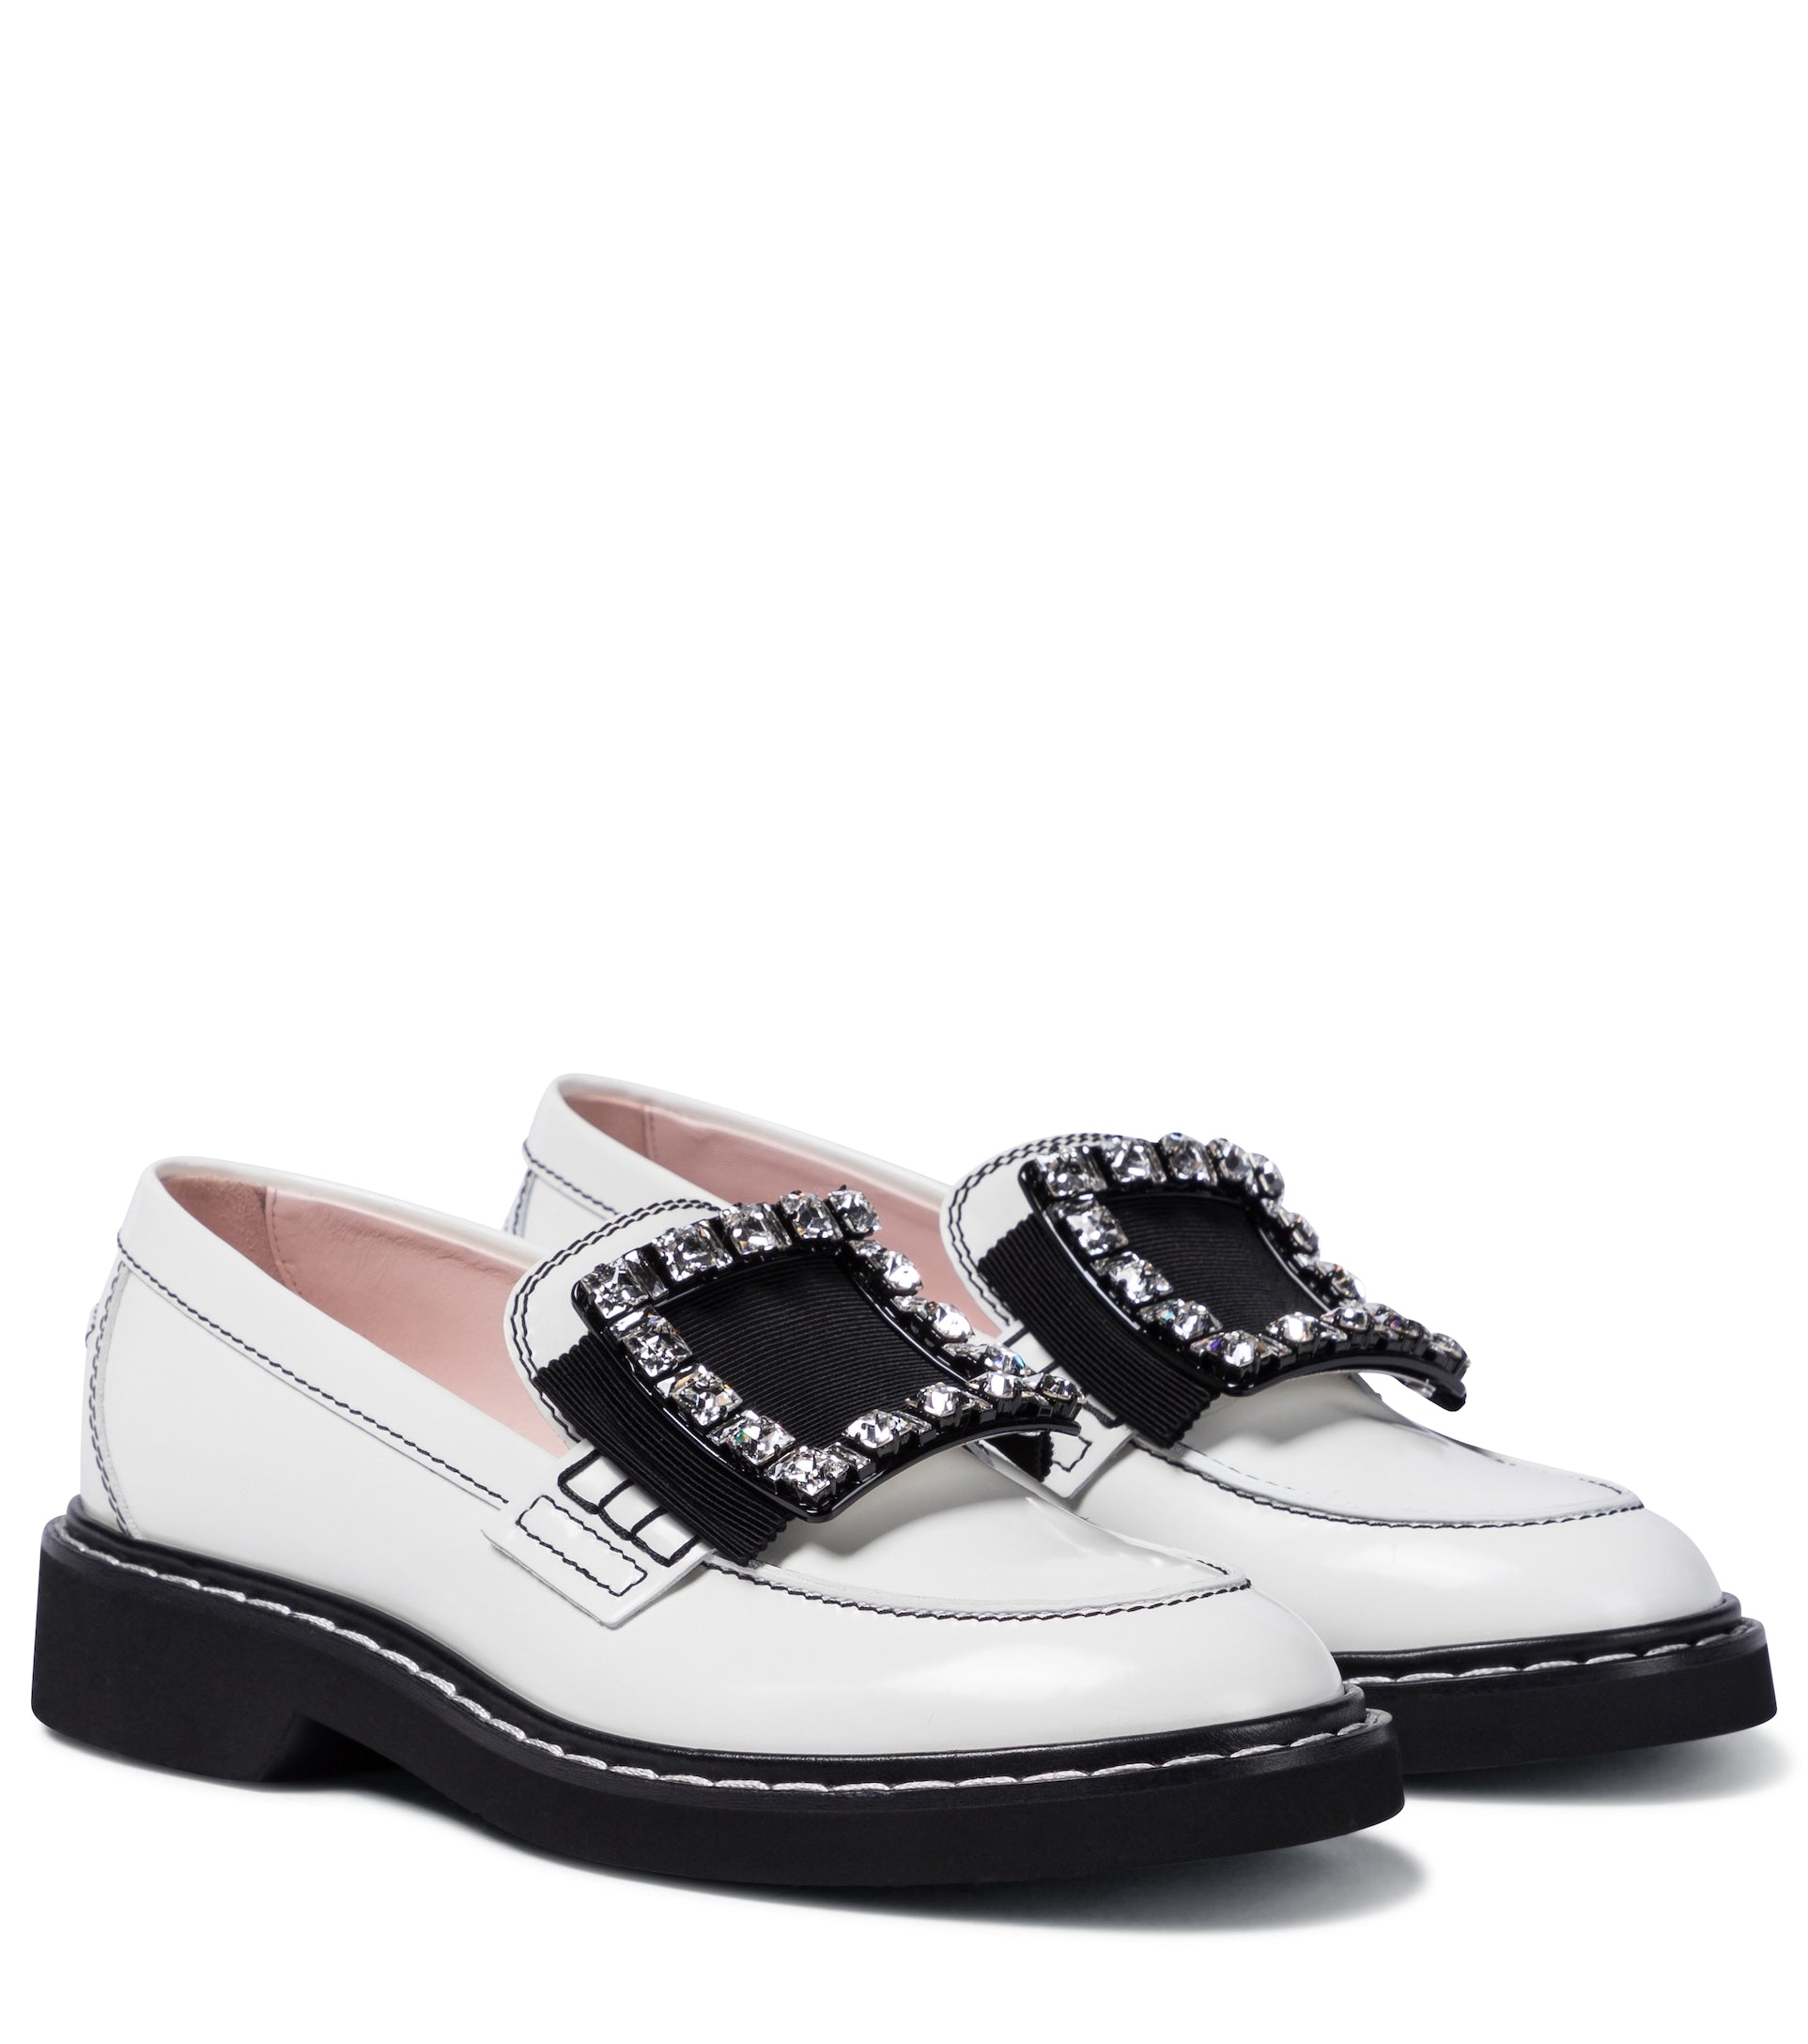 Viv' Rangers Strass Stitch leather loafers with Embellished Buckle